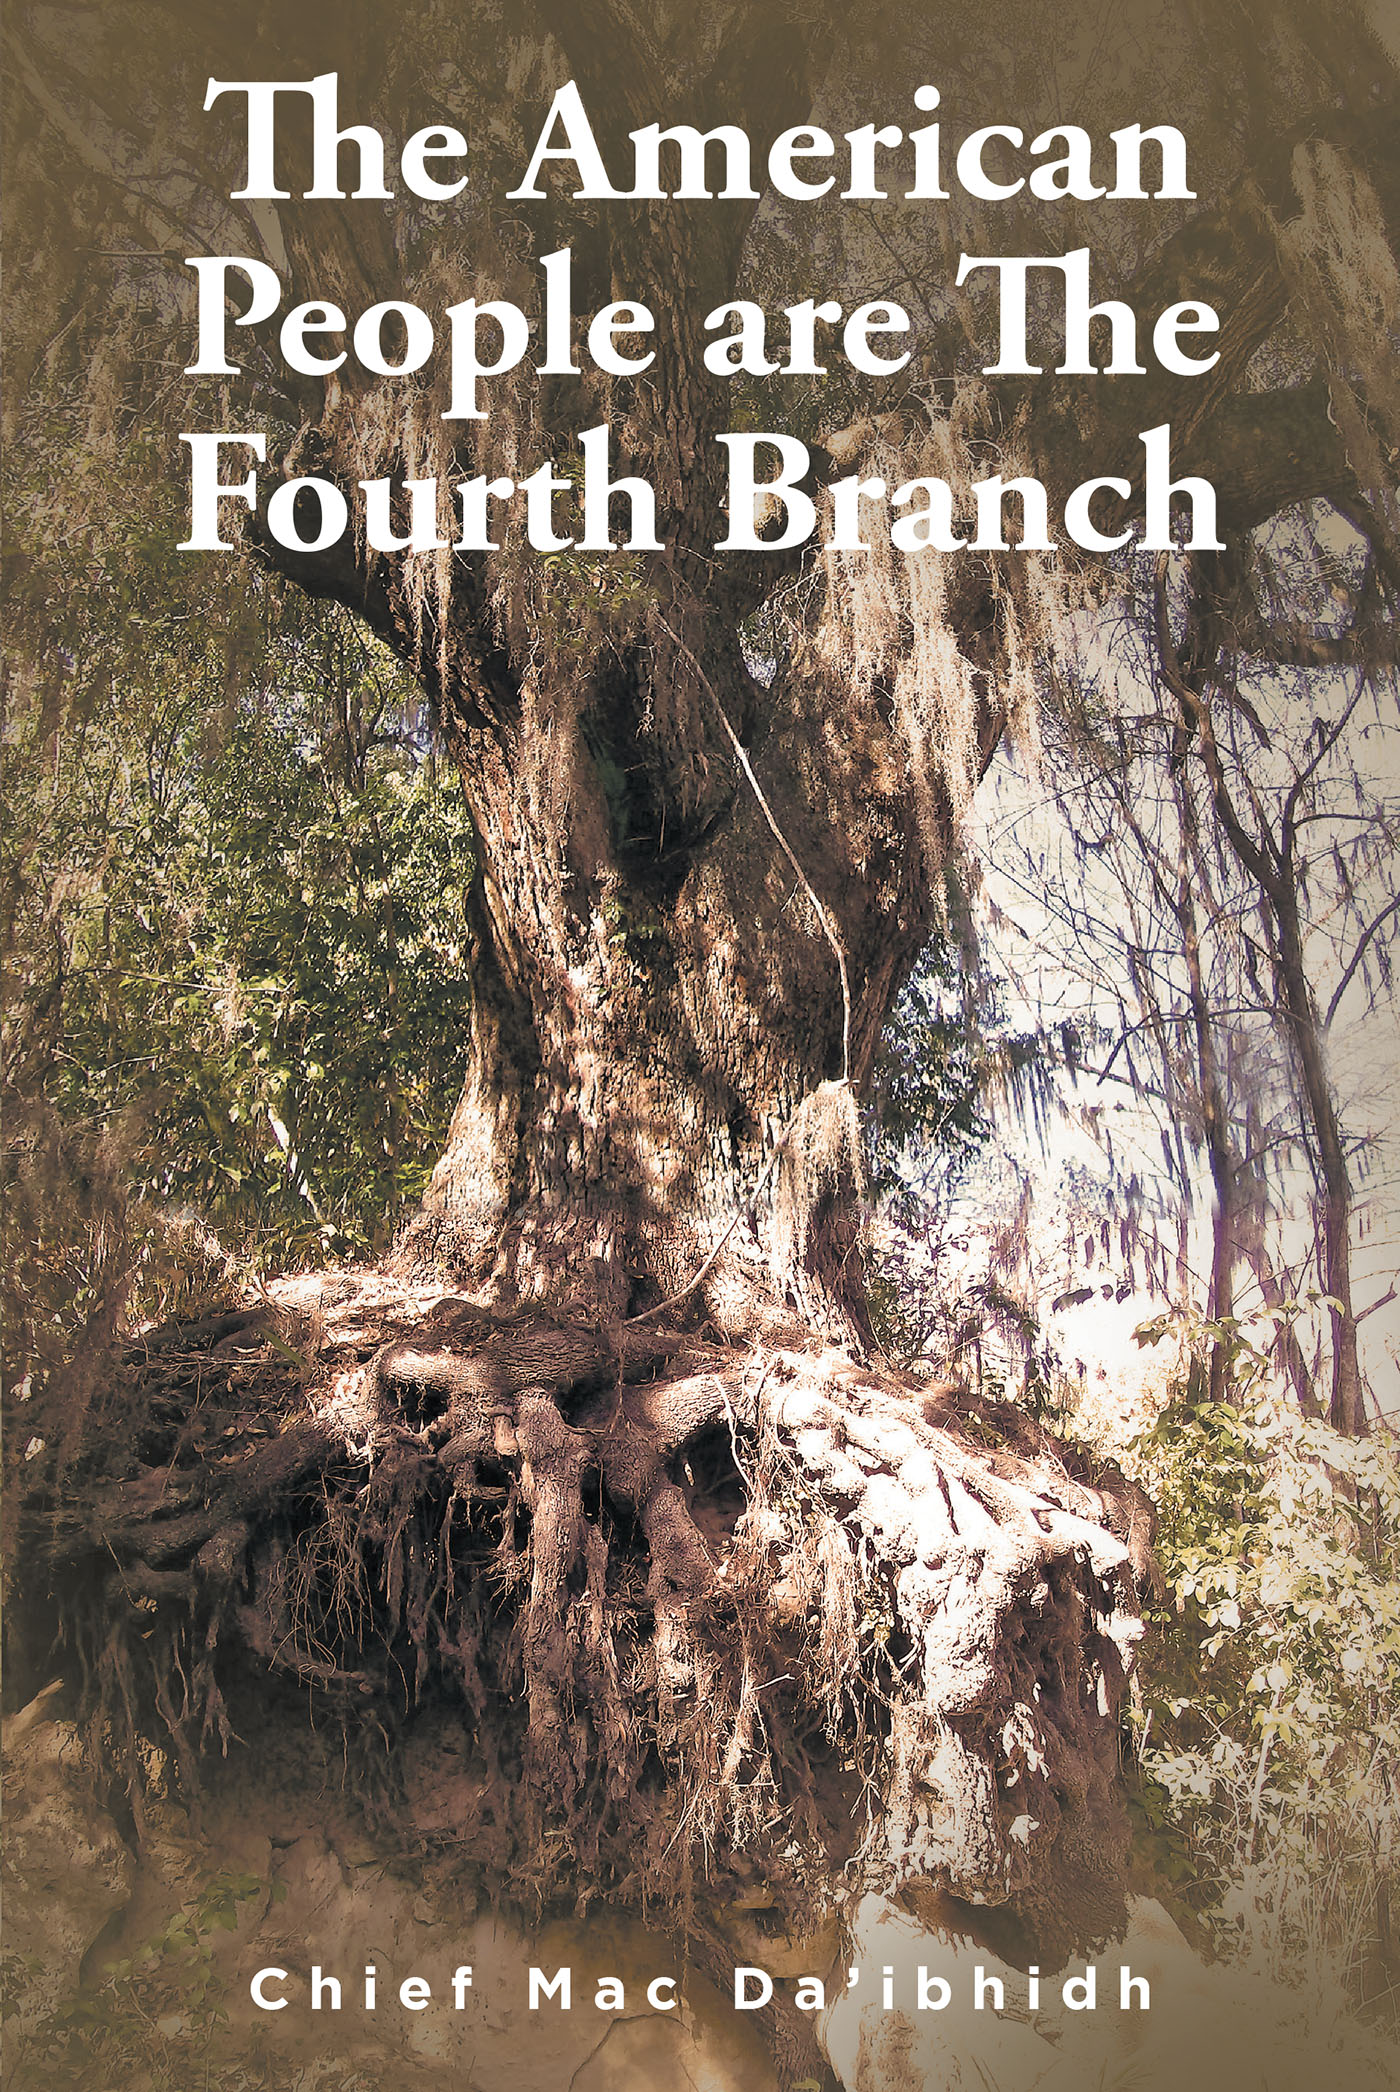 Chief Mac Da’ibhidh’s New Book, "The American People are The Fourth Branch," Explores the Power the American People Were Intended to Have Within Their Government